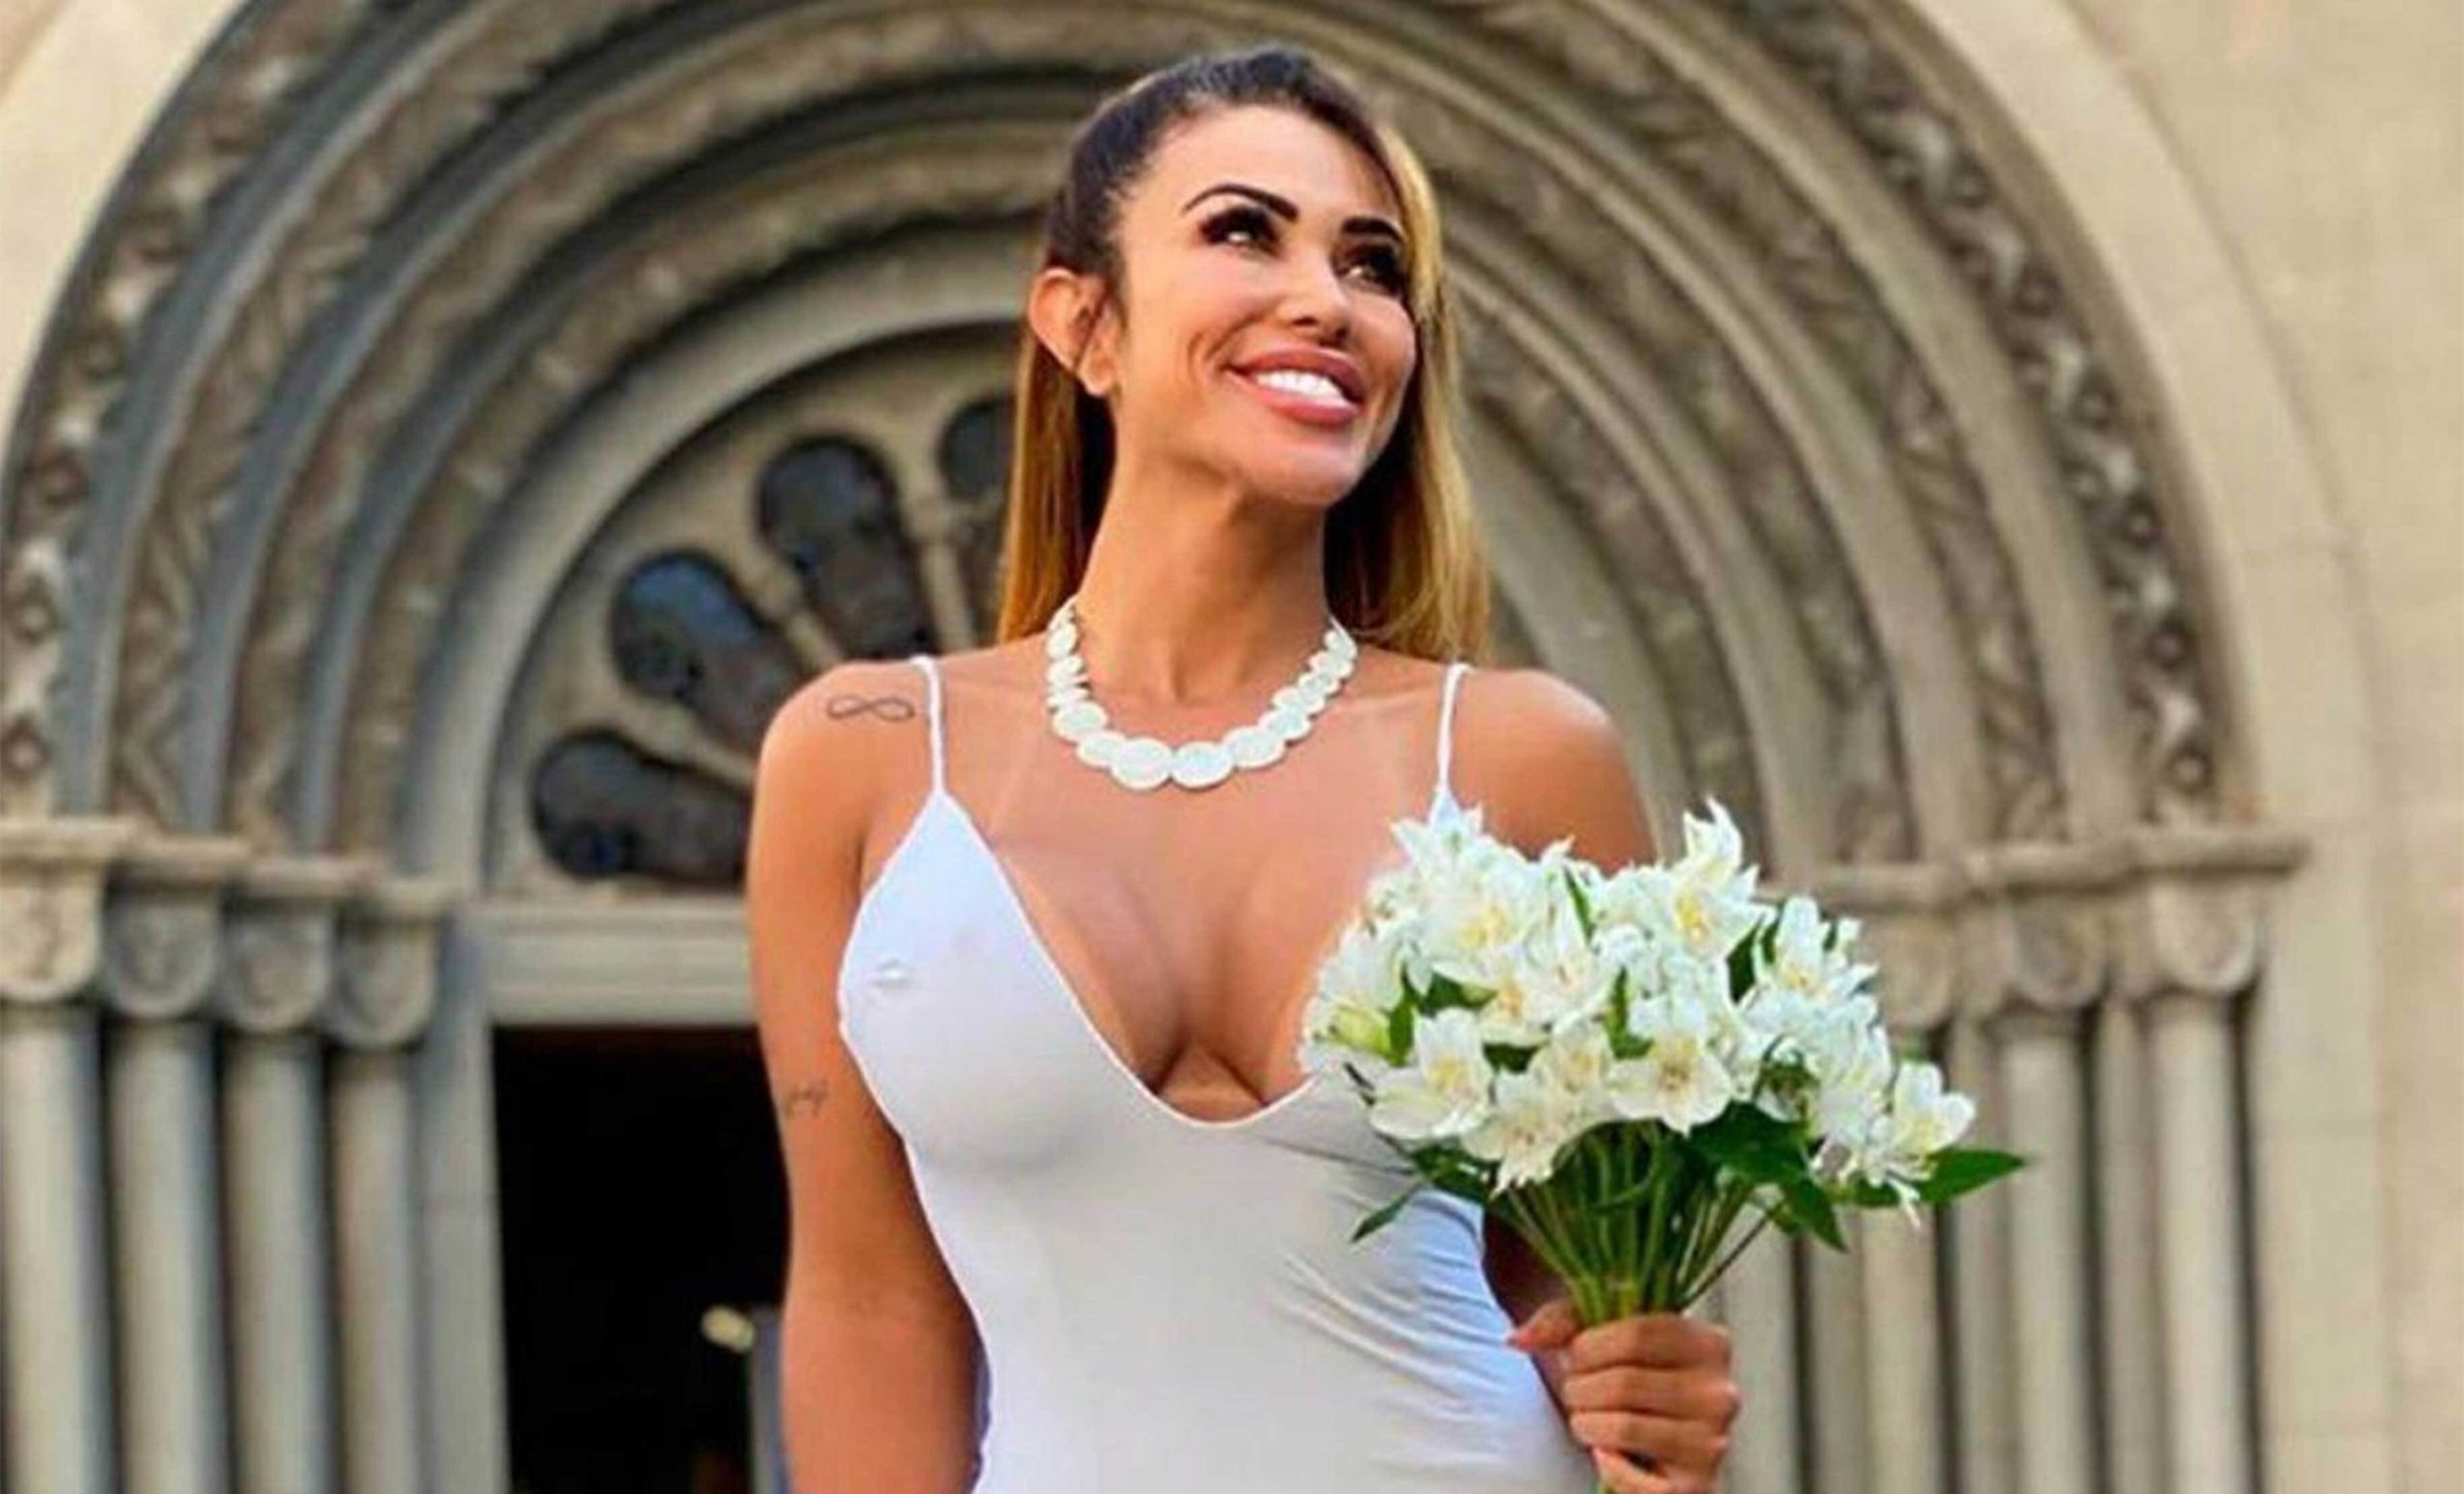 This Woman Married Herself And 90 Days Later, Divorced Herself Too. Okay, We Can Stan!